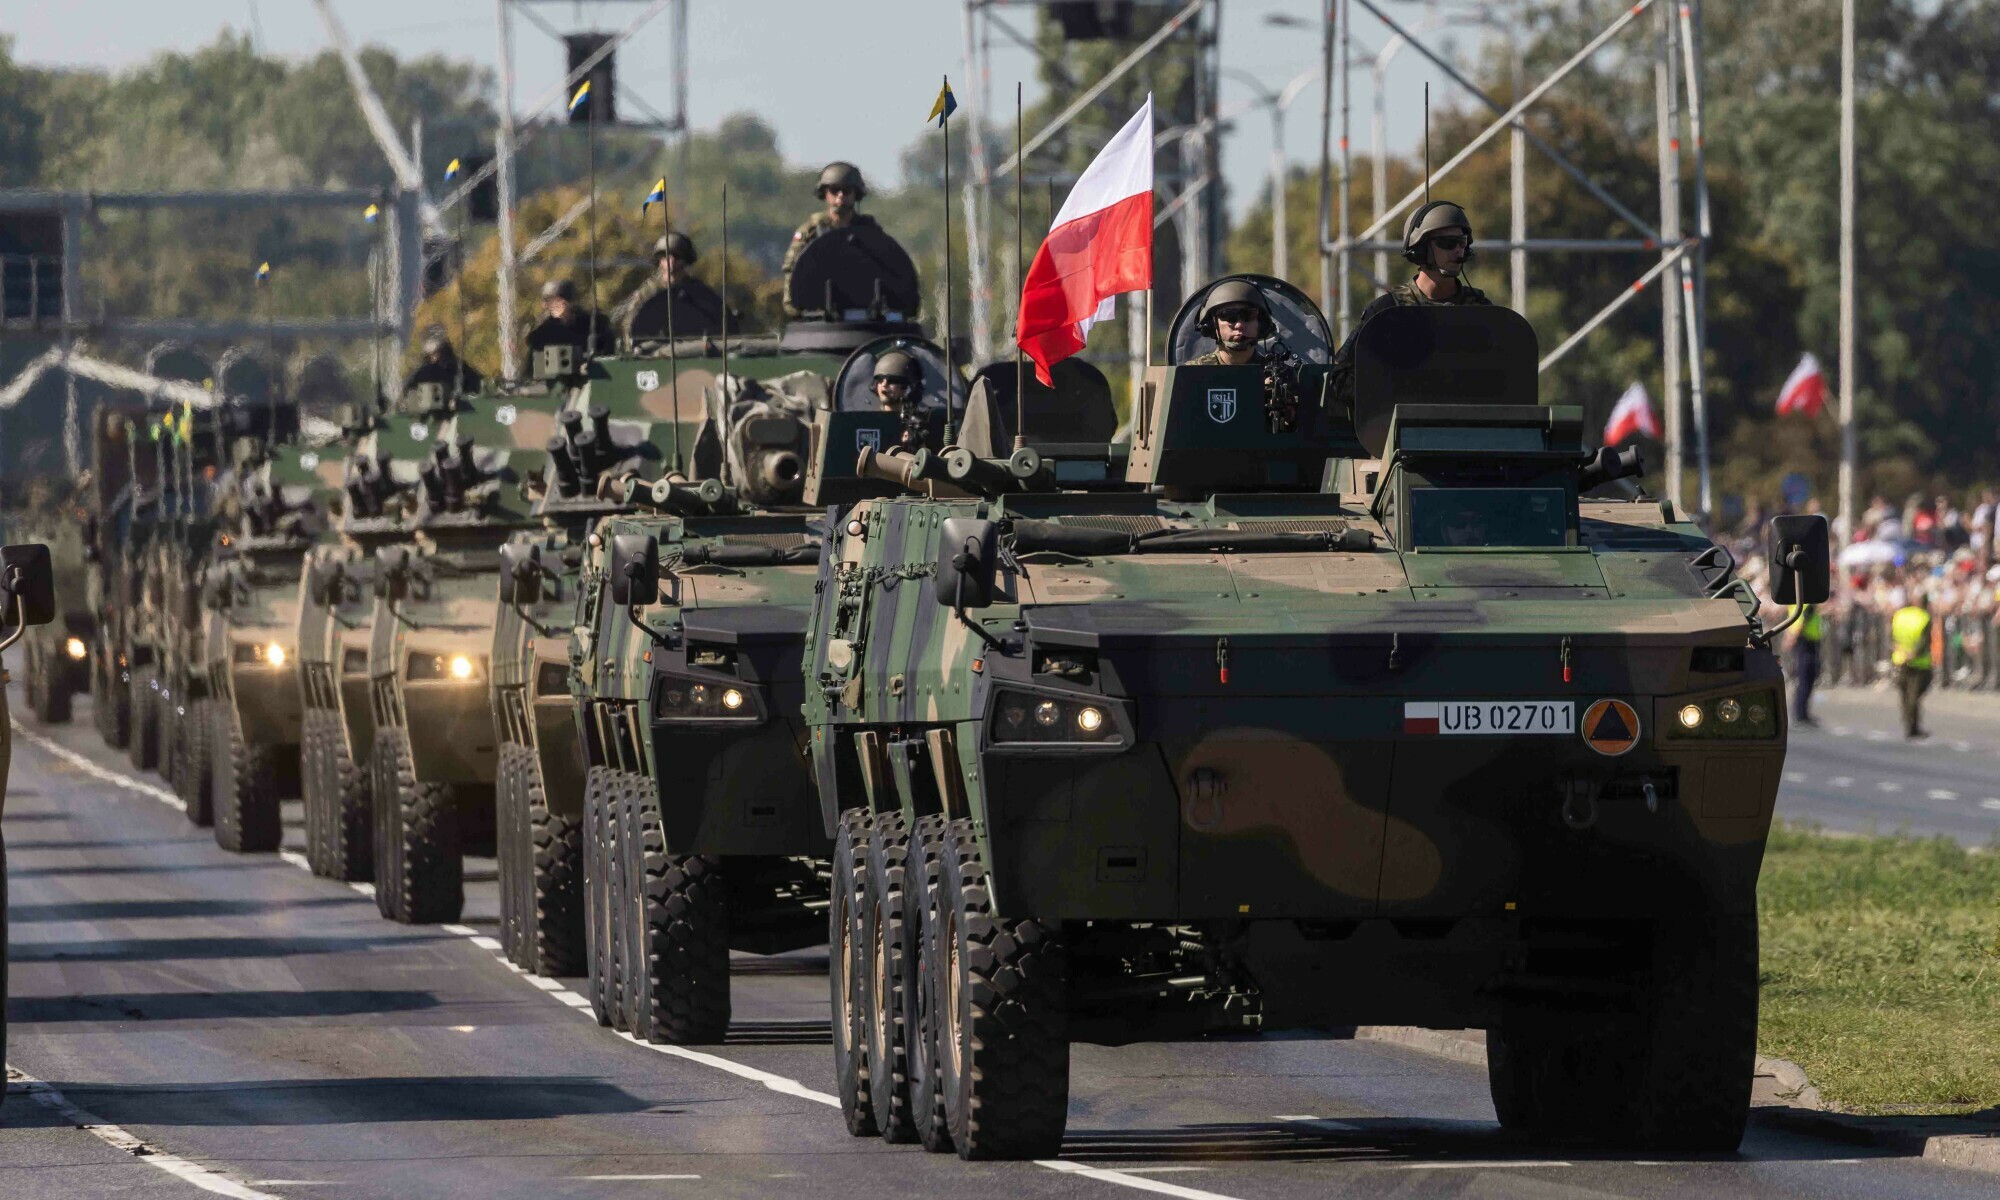 Polish soldiers take part in a military parade in Warsaw